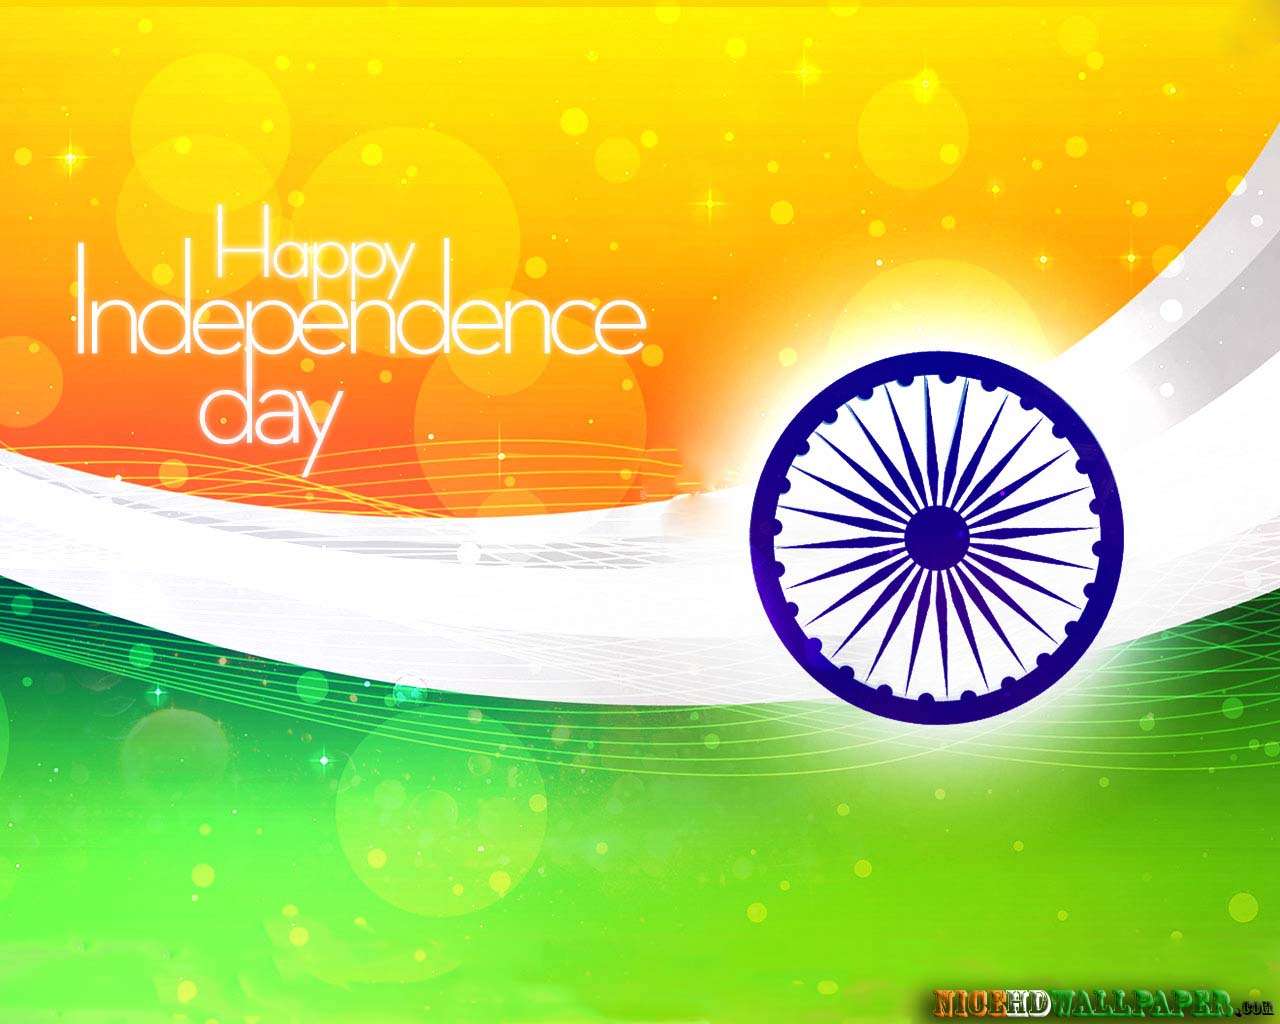 indian independence day wallpaper free download,flag,graphic design,circle,illustration